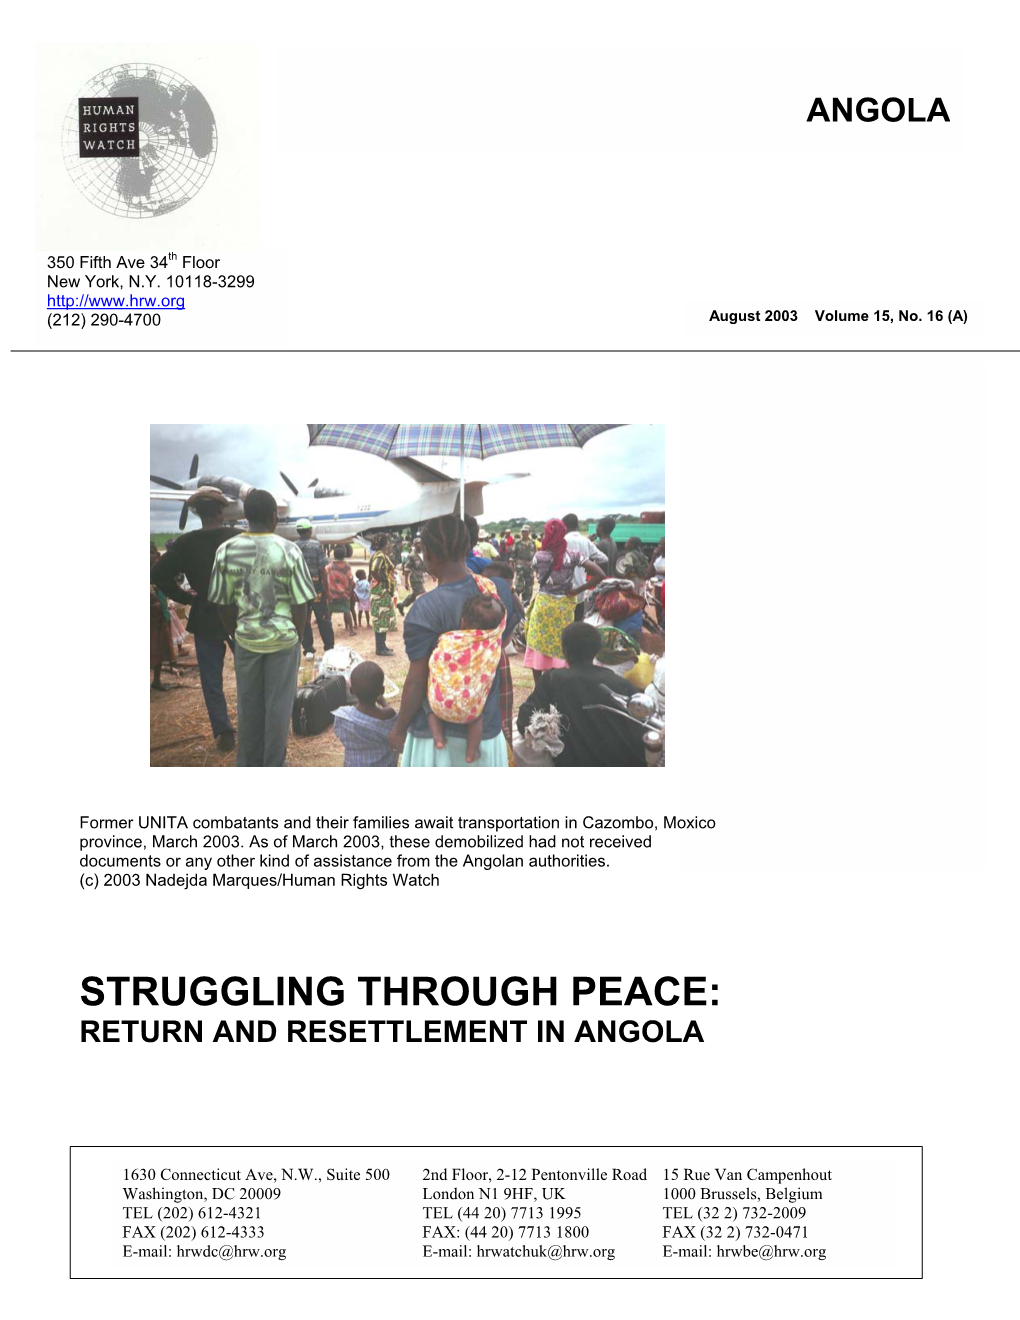 Return and Resettlement in Angola